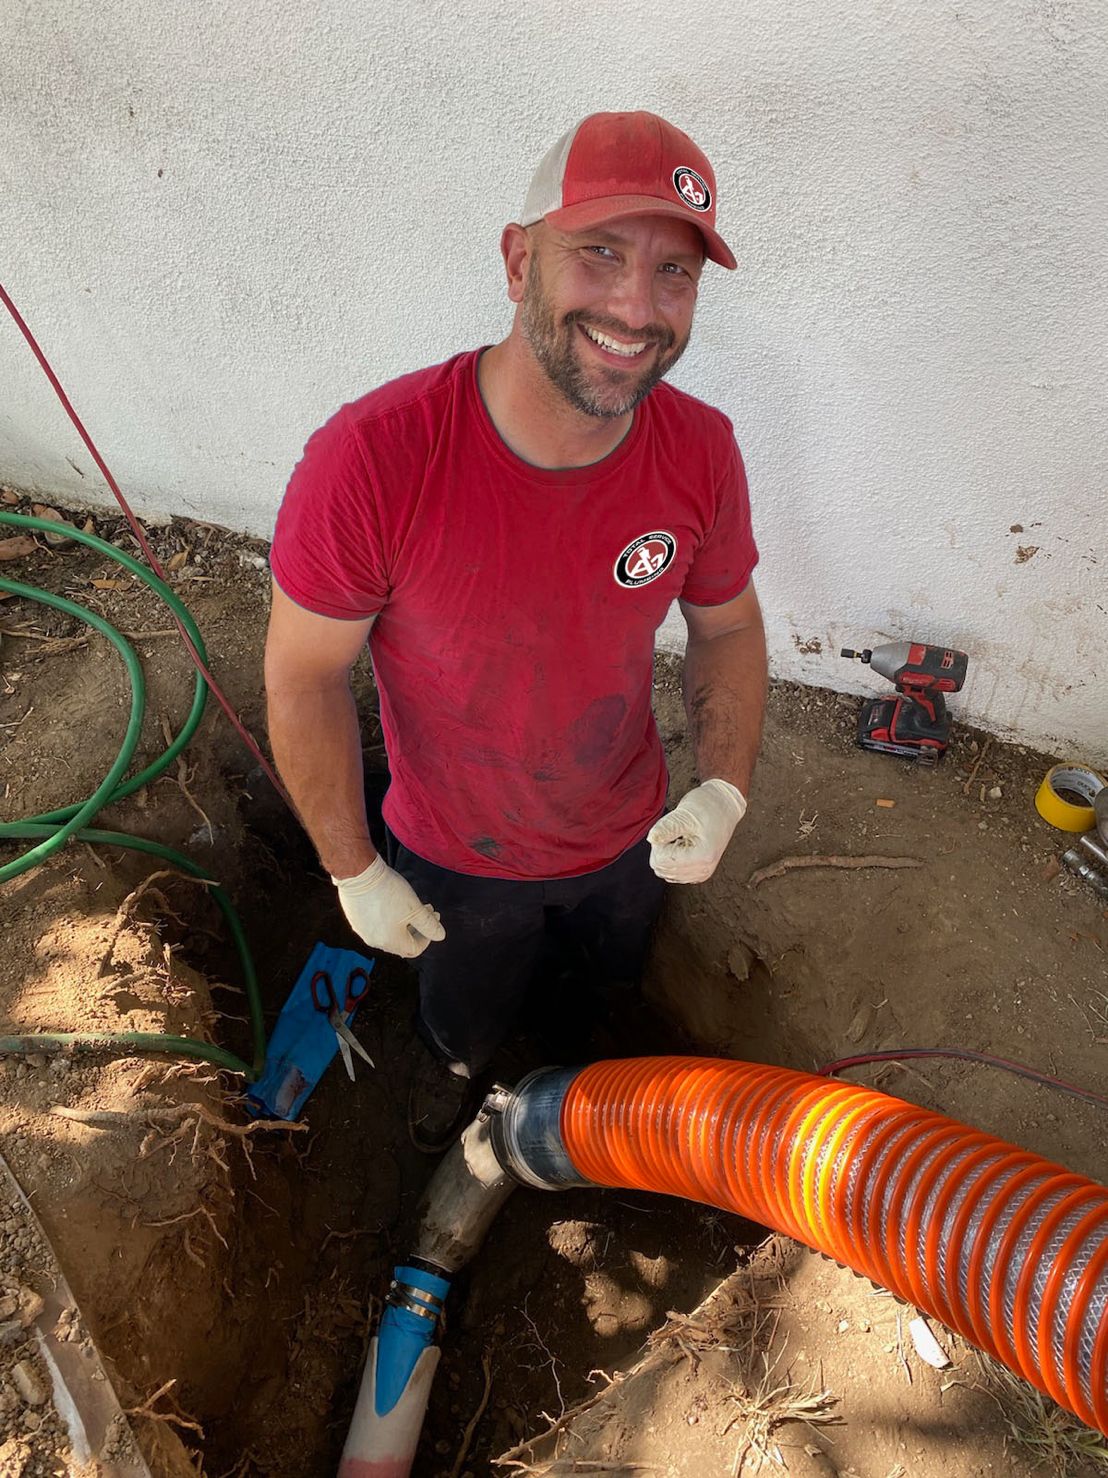 Los Angeles Sewer Repair Team relining a 6' sewer line